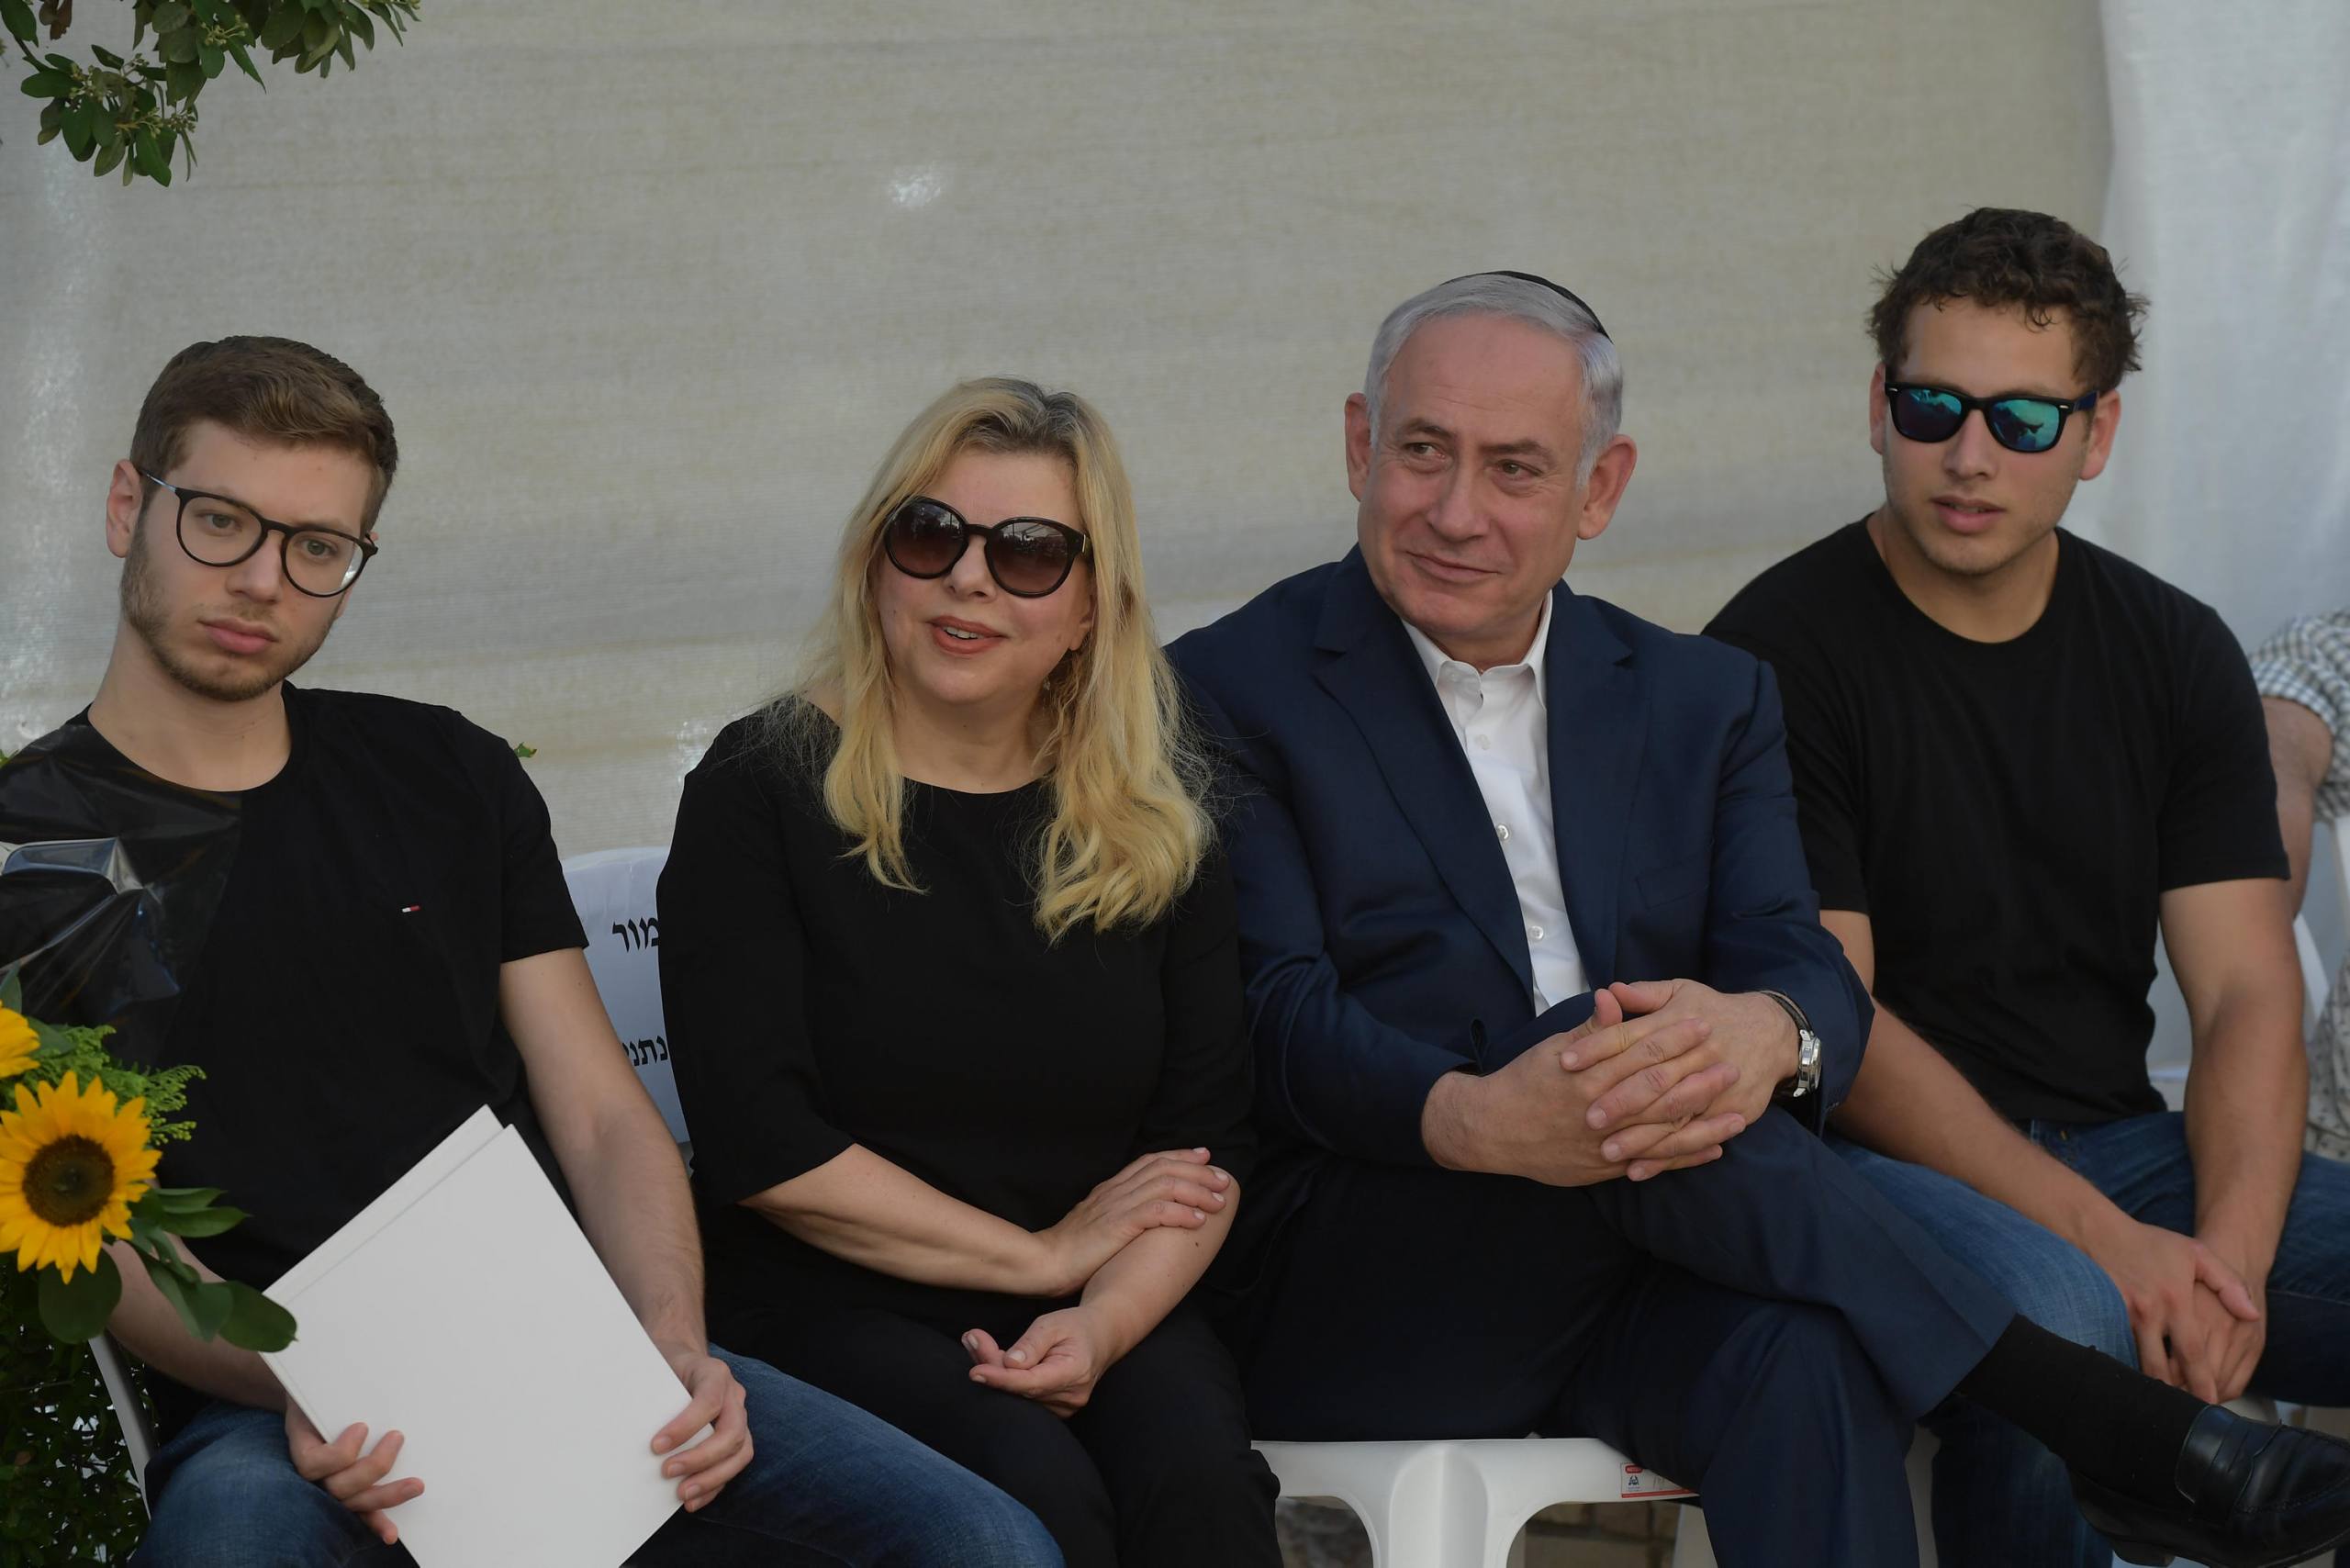 Prime Minister Benjamin Netanyahu his wife Sara, their sons Yair and Avner, attend a memorial ceremony for Netanyahu's brother, Yoni Netanyahu, at the Mount Herzl Military Cemetery, in Jerusalem, July 9, 2017. Yoni Netanyahu was killed in the operation to free soldiers kidnapped in Antebe. Photo by Amos Ben Gershom/GPO *** Local Caption *** ????? ?????? ??? ????
?????  ???? ?????? ????? ???? ?????
??? ?????? ????? ??????? ???, ????? ???? ??????